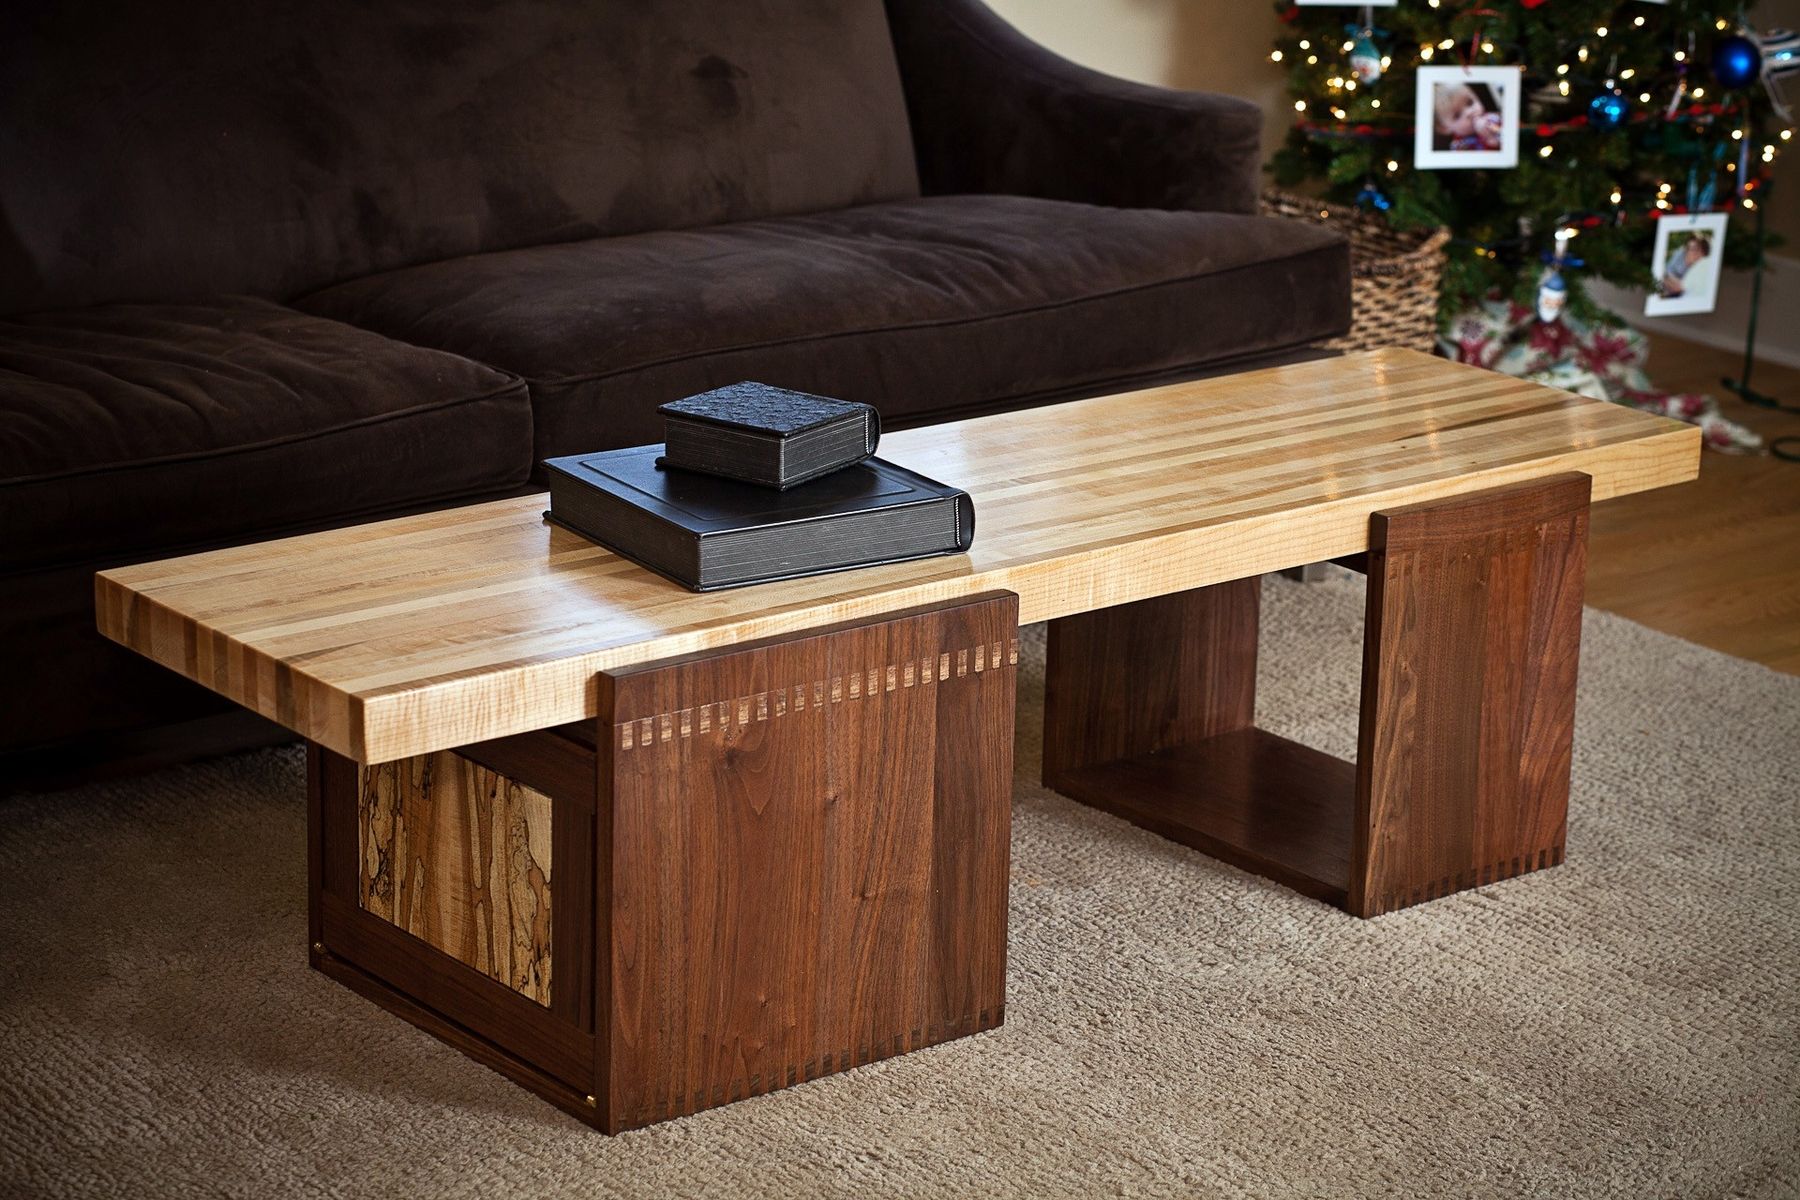 How To Build A Coffee Table With Hidden Storage - Best Design Idea